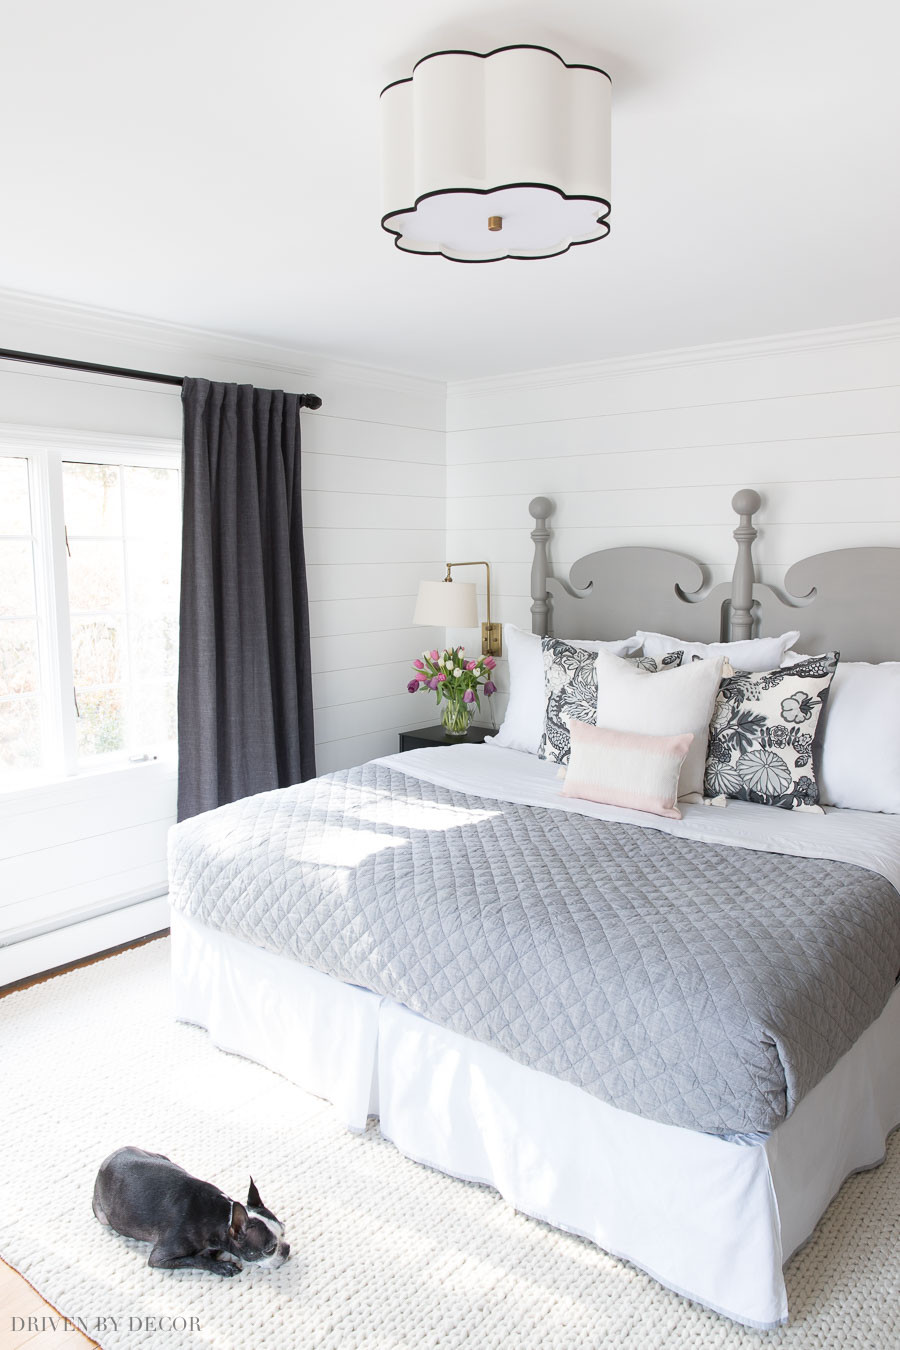 Organizing Ideas For Bedroom
 Ideas for Organizing & Refreshing Your Bedroom for Spring